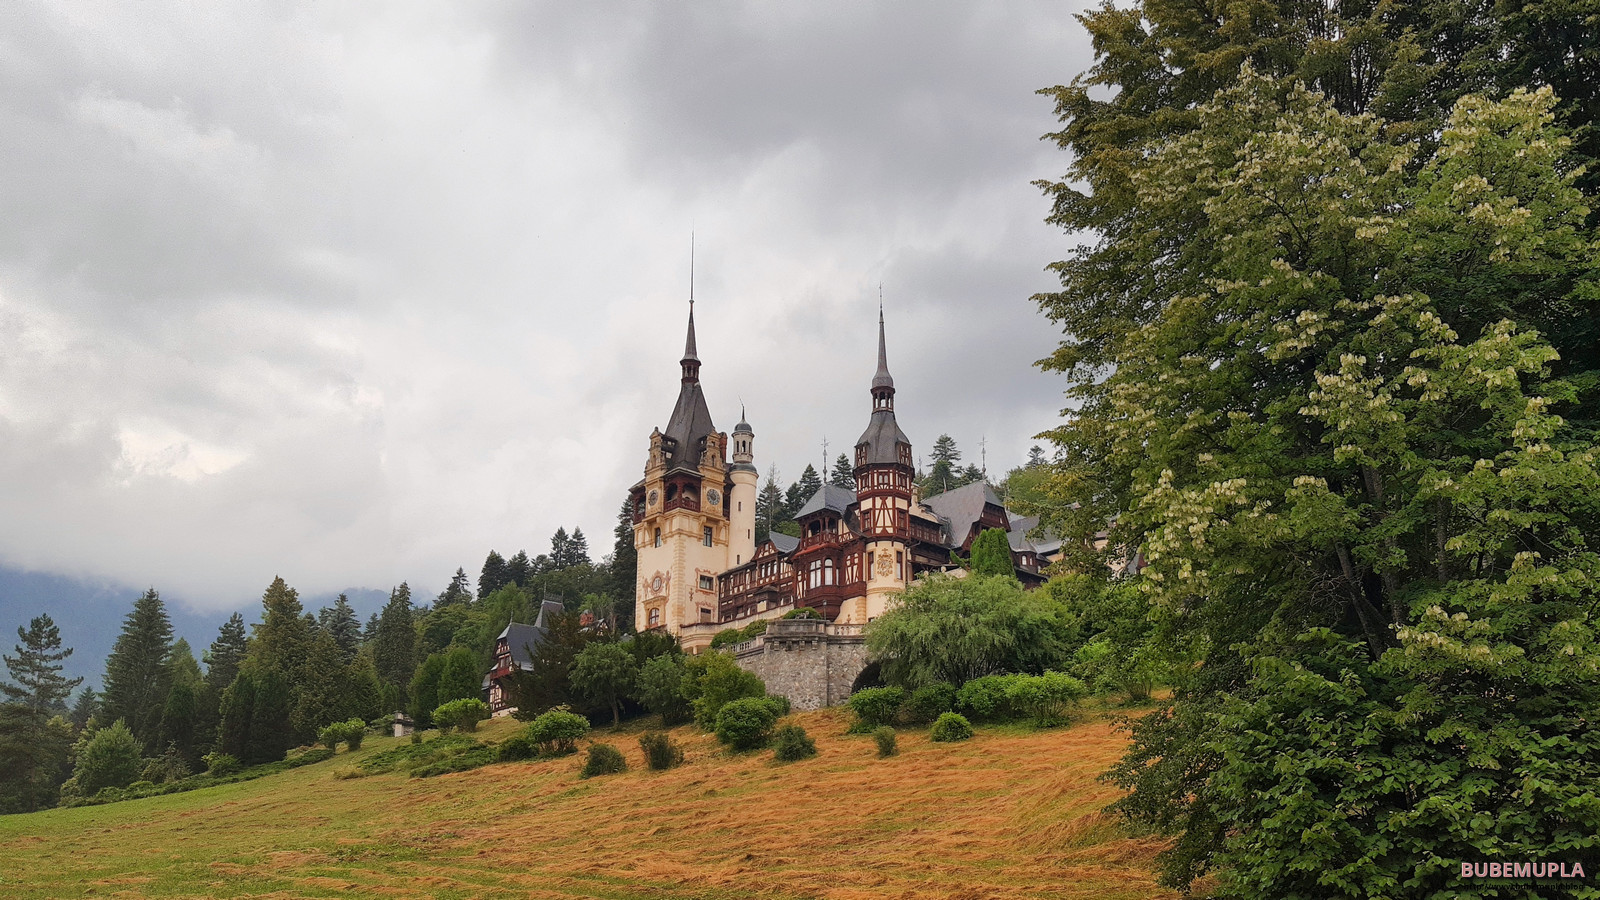 Chapter 22 in which we go to Peles Castle